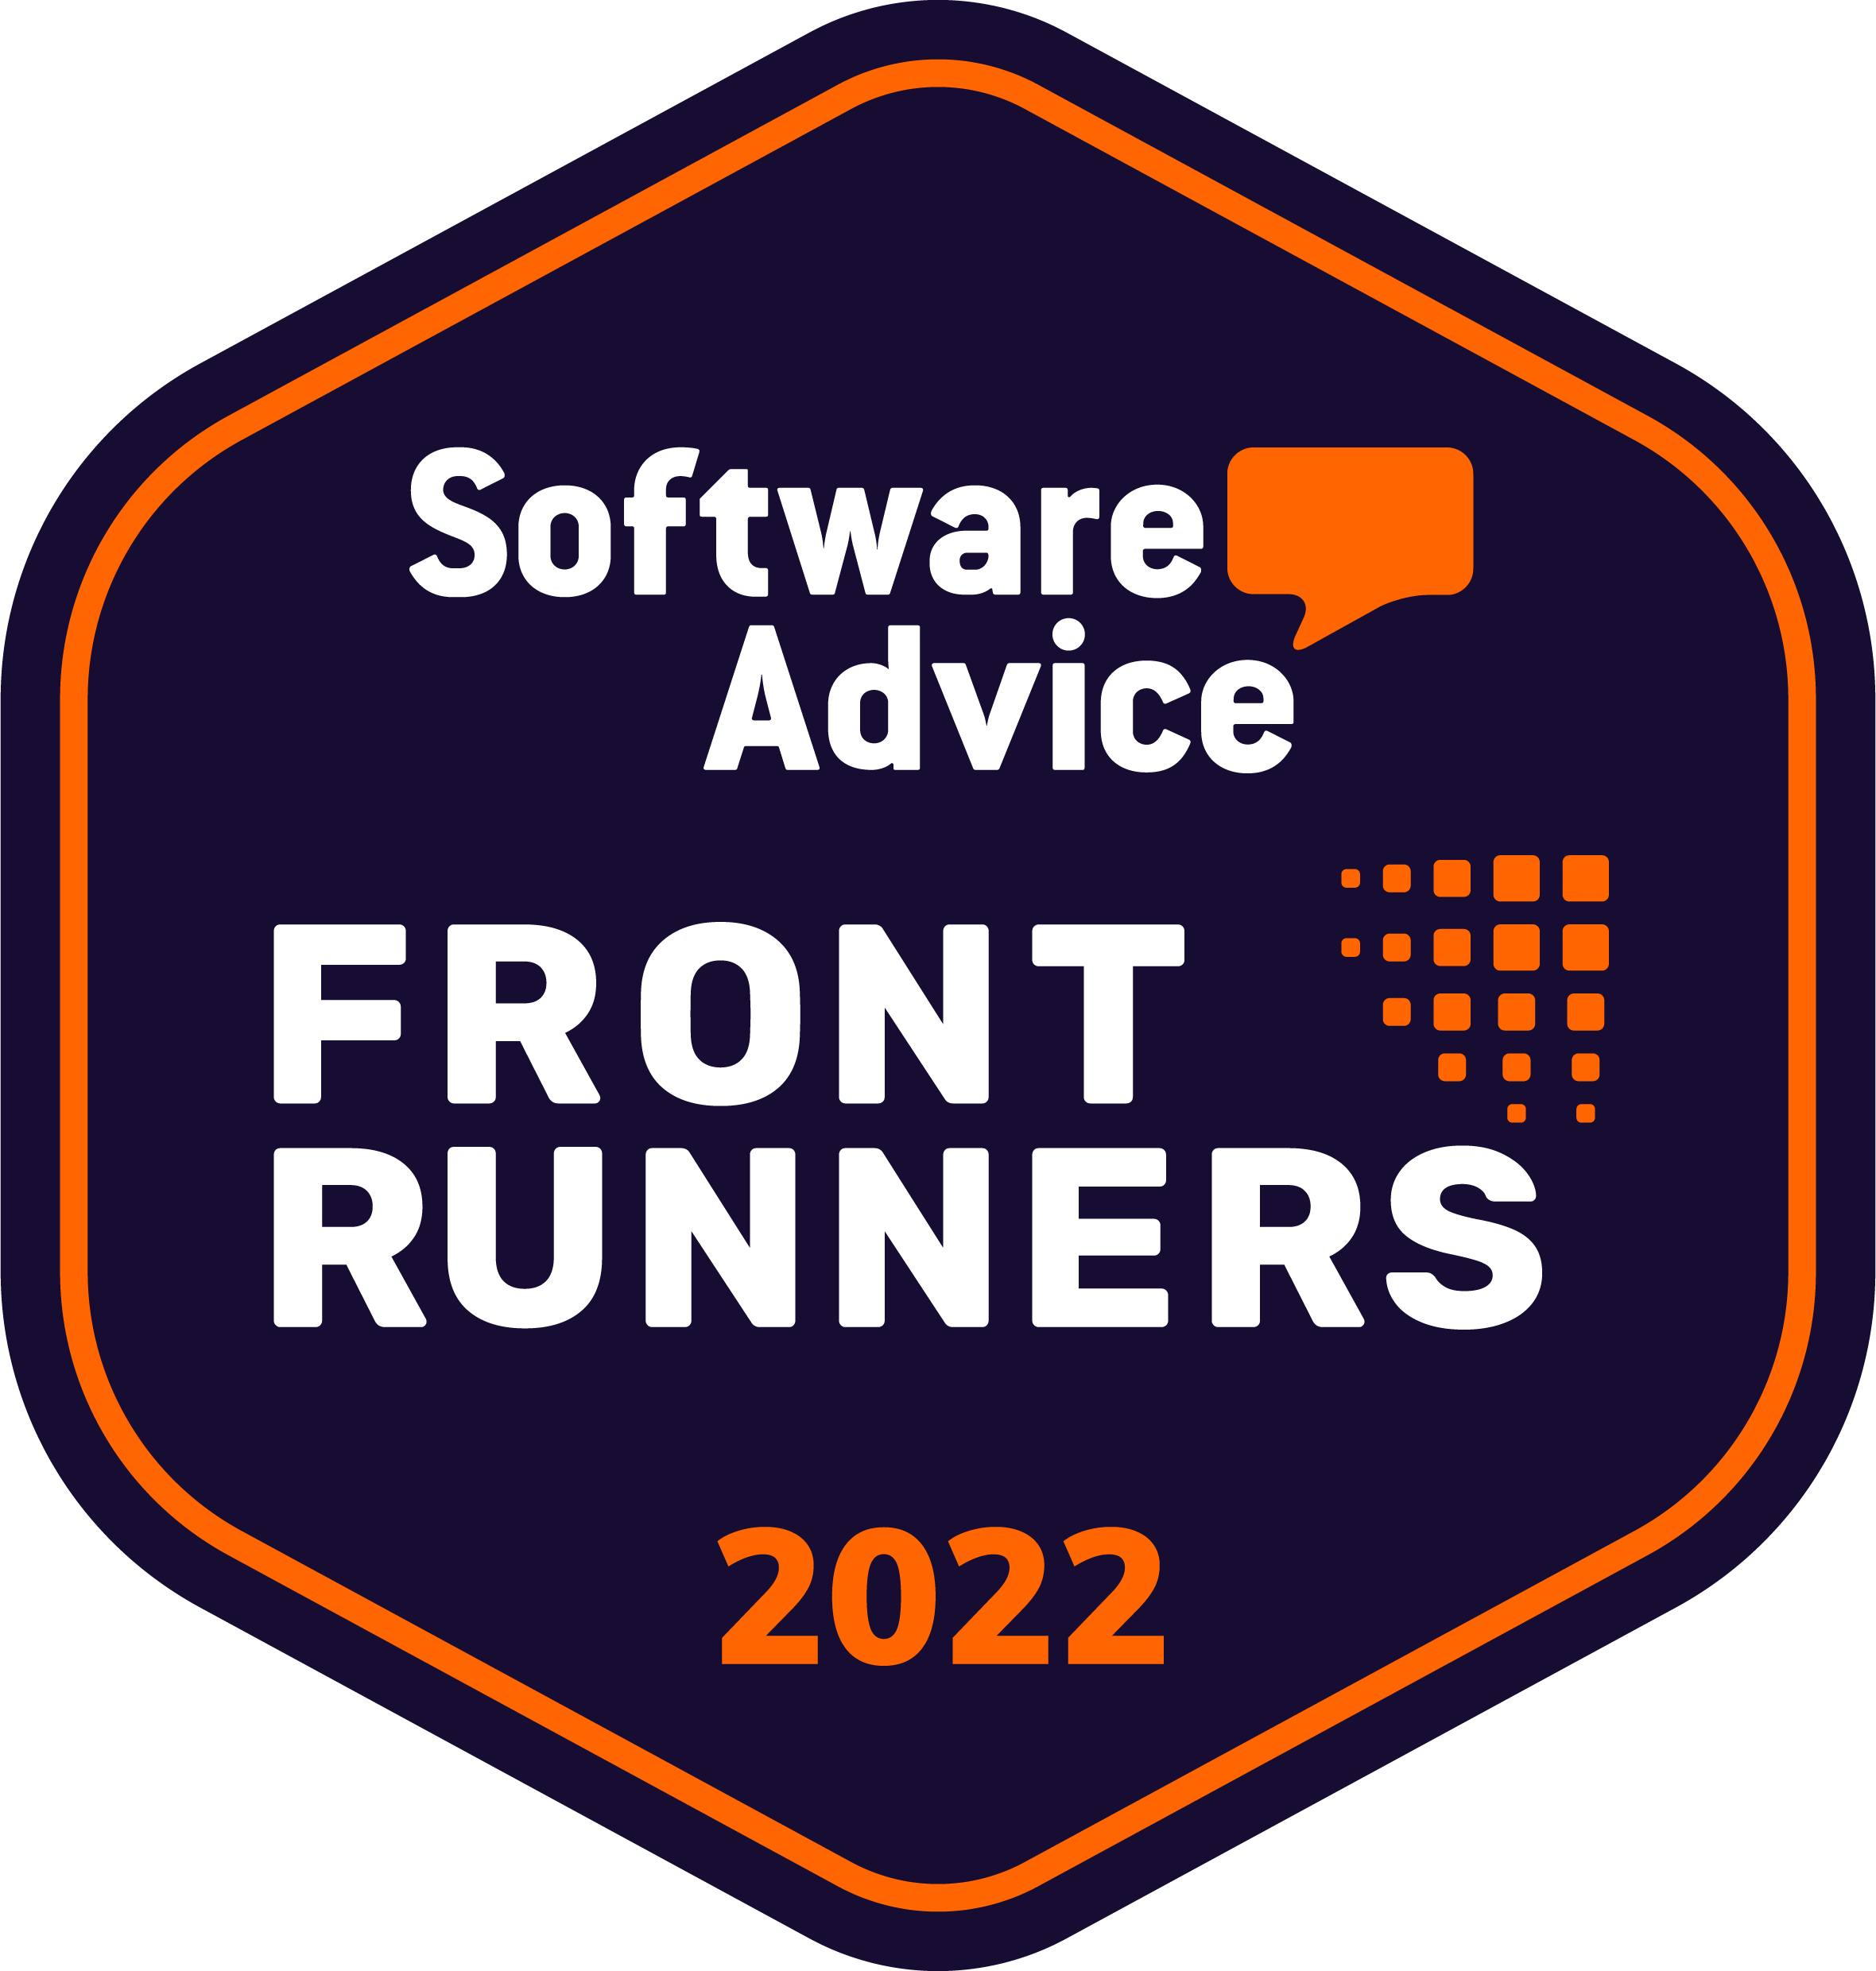 https://www.rxnt.com/wp-content/uploads/SA-Frontrunners-Badge-22-3.png